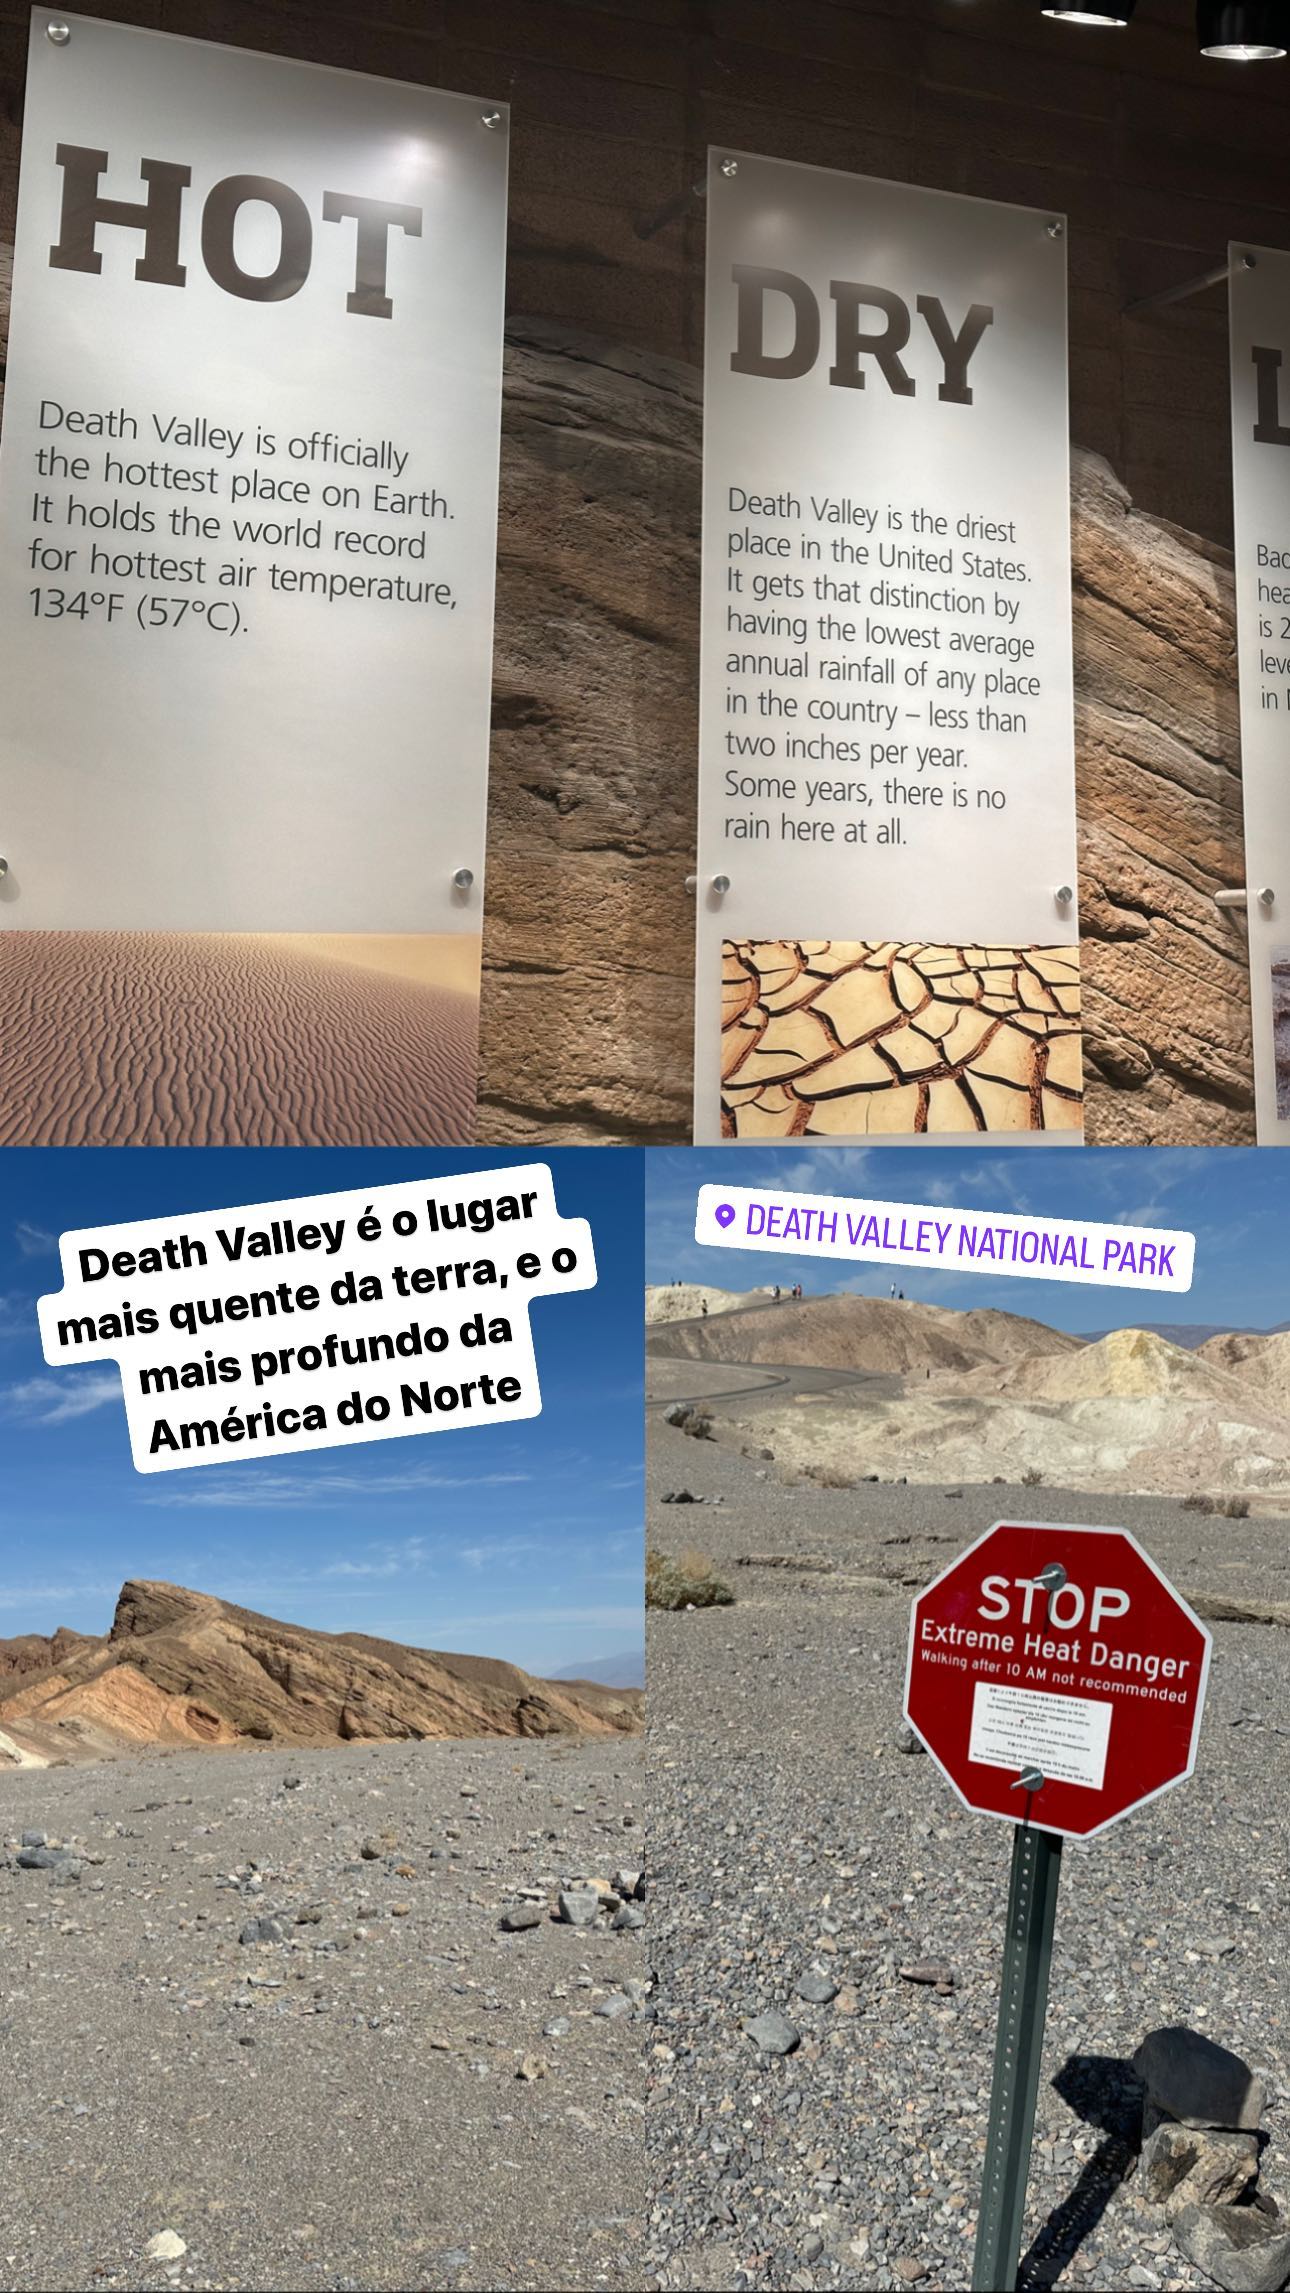 Death Valley is the hottest place on earth, and the deepest in North America